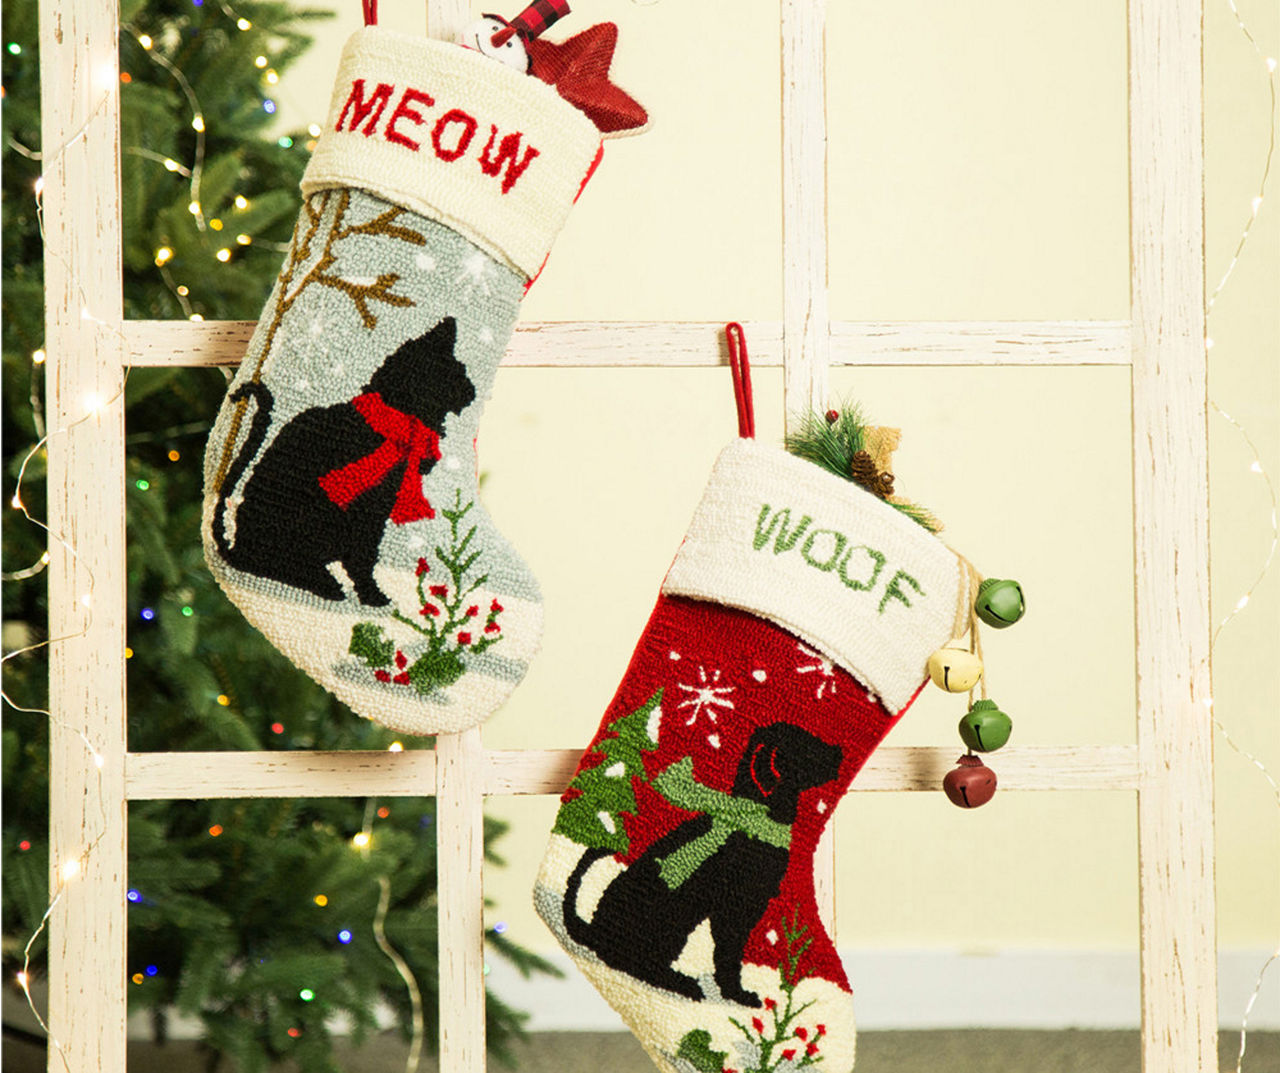 48 Pieces Stocking Pet 6ast Felt 18in 36dog/12cat W/funny Sayings Red/green  Jhook/ht - Christmas Stocking - at 